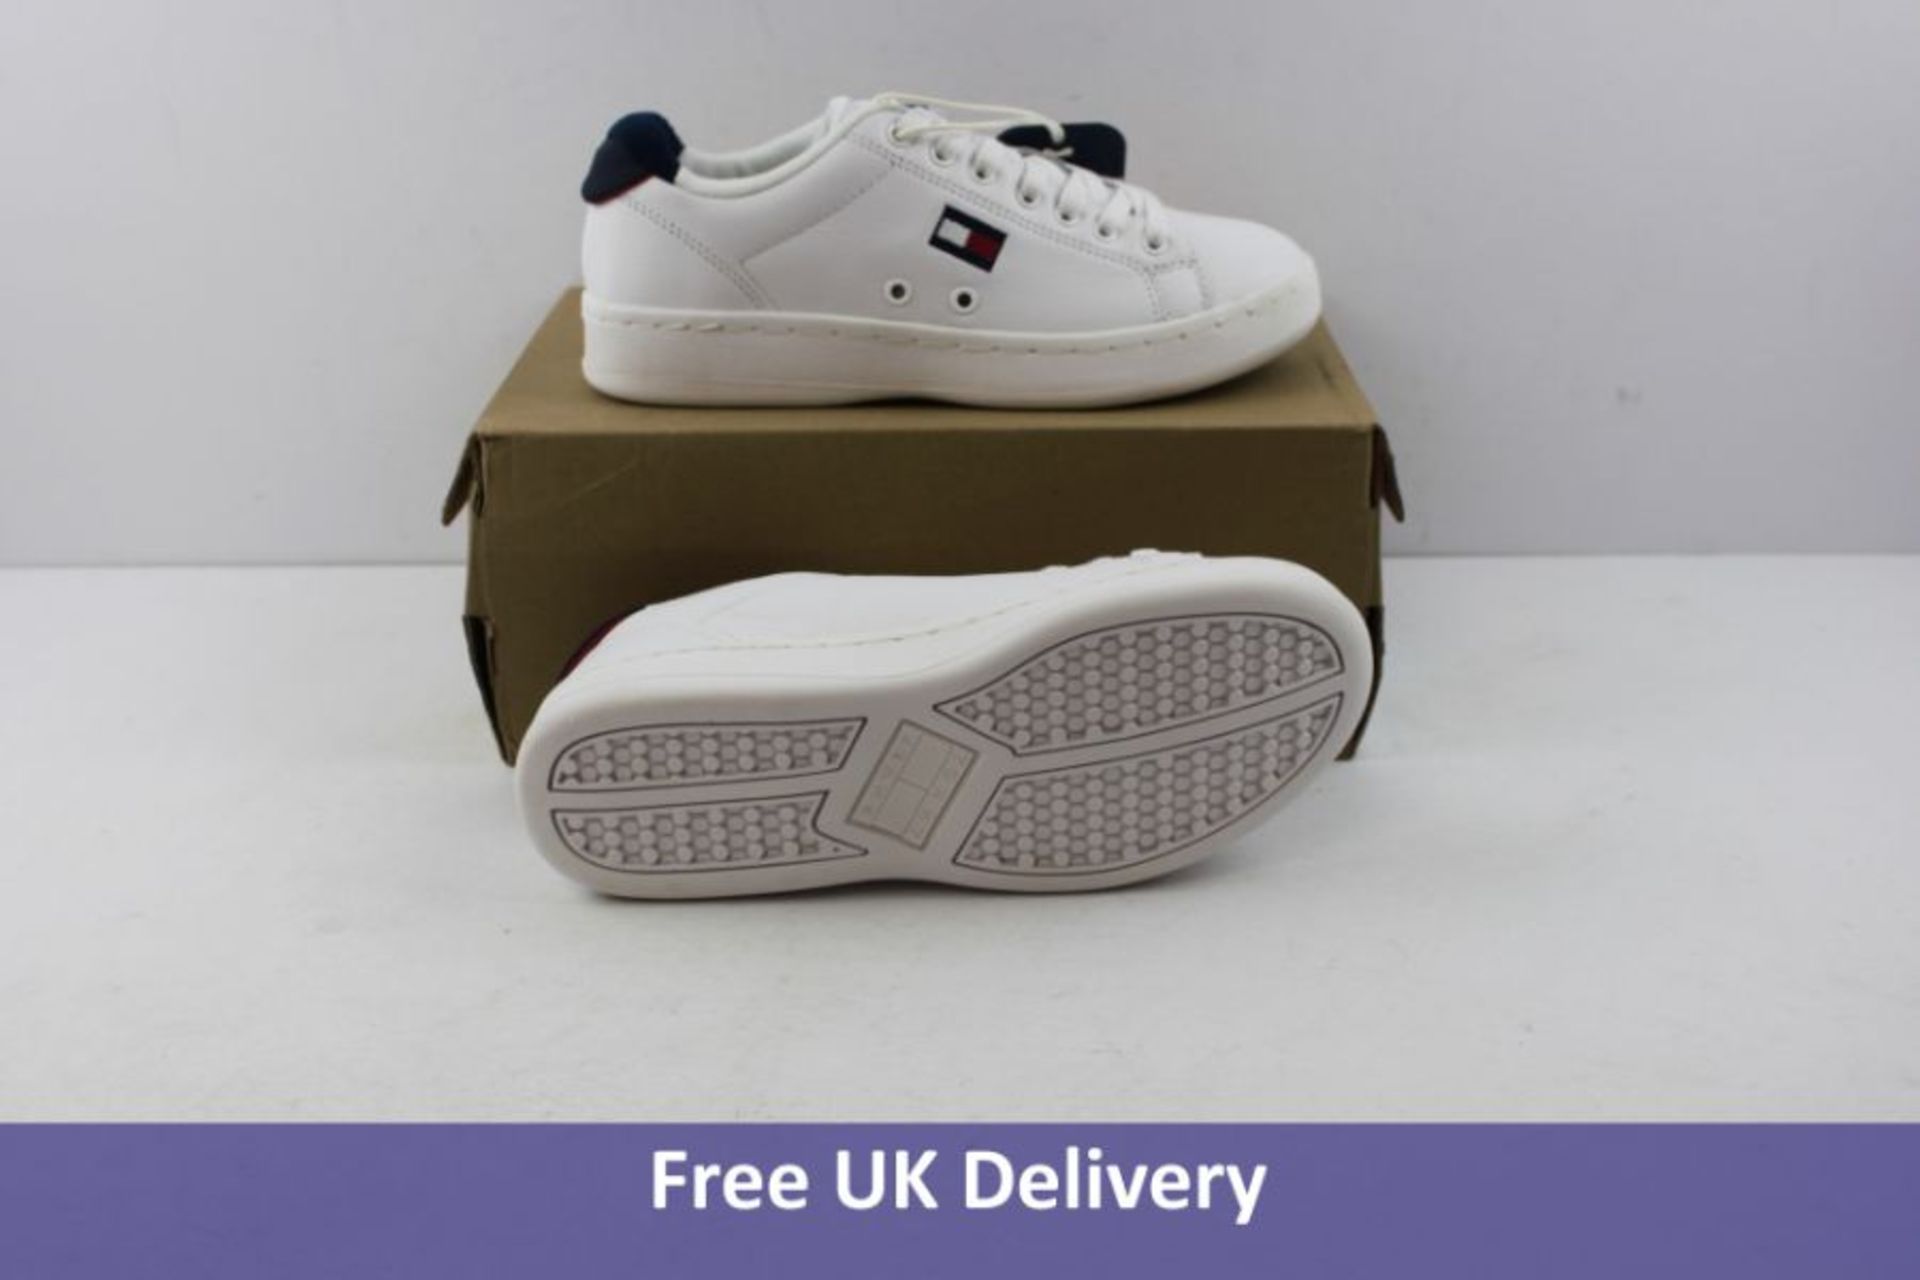 Tommy Jeans Men's Leather Trainers, White, UK 3.5. Box damaged